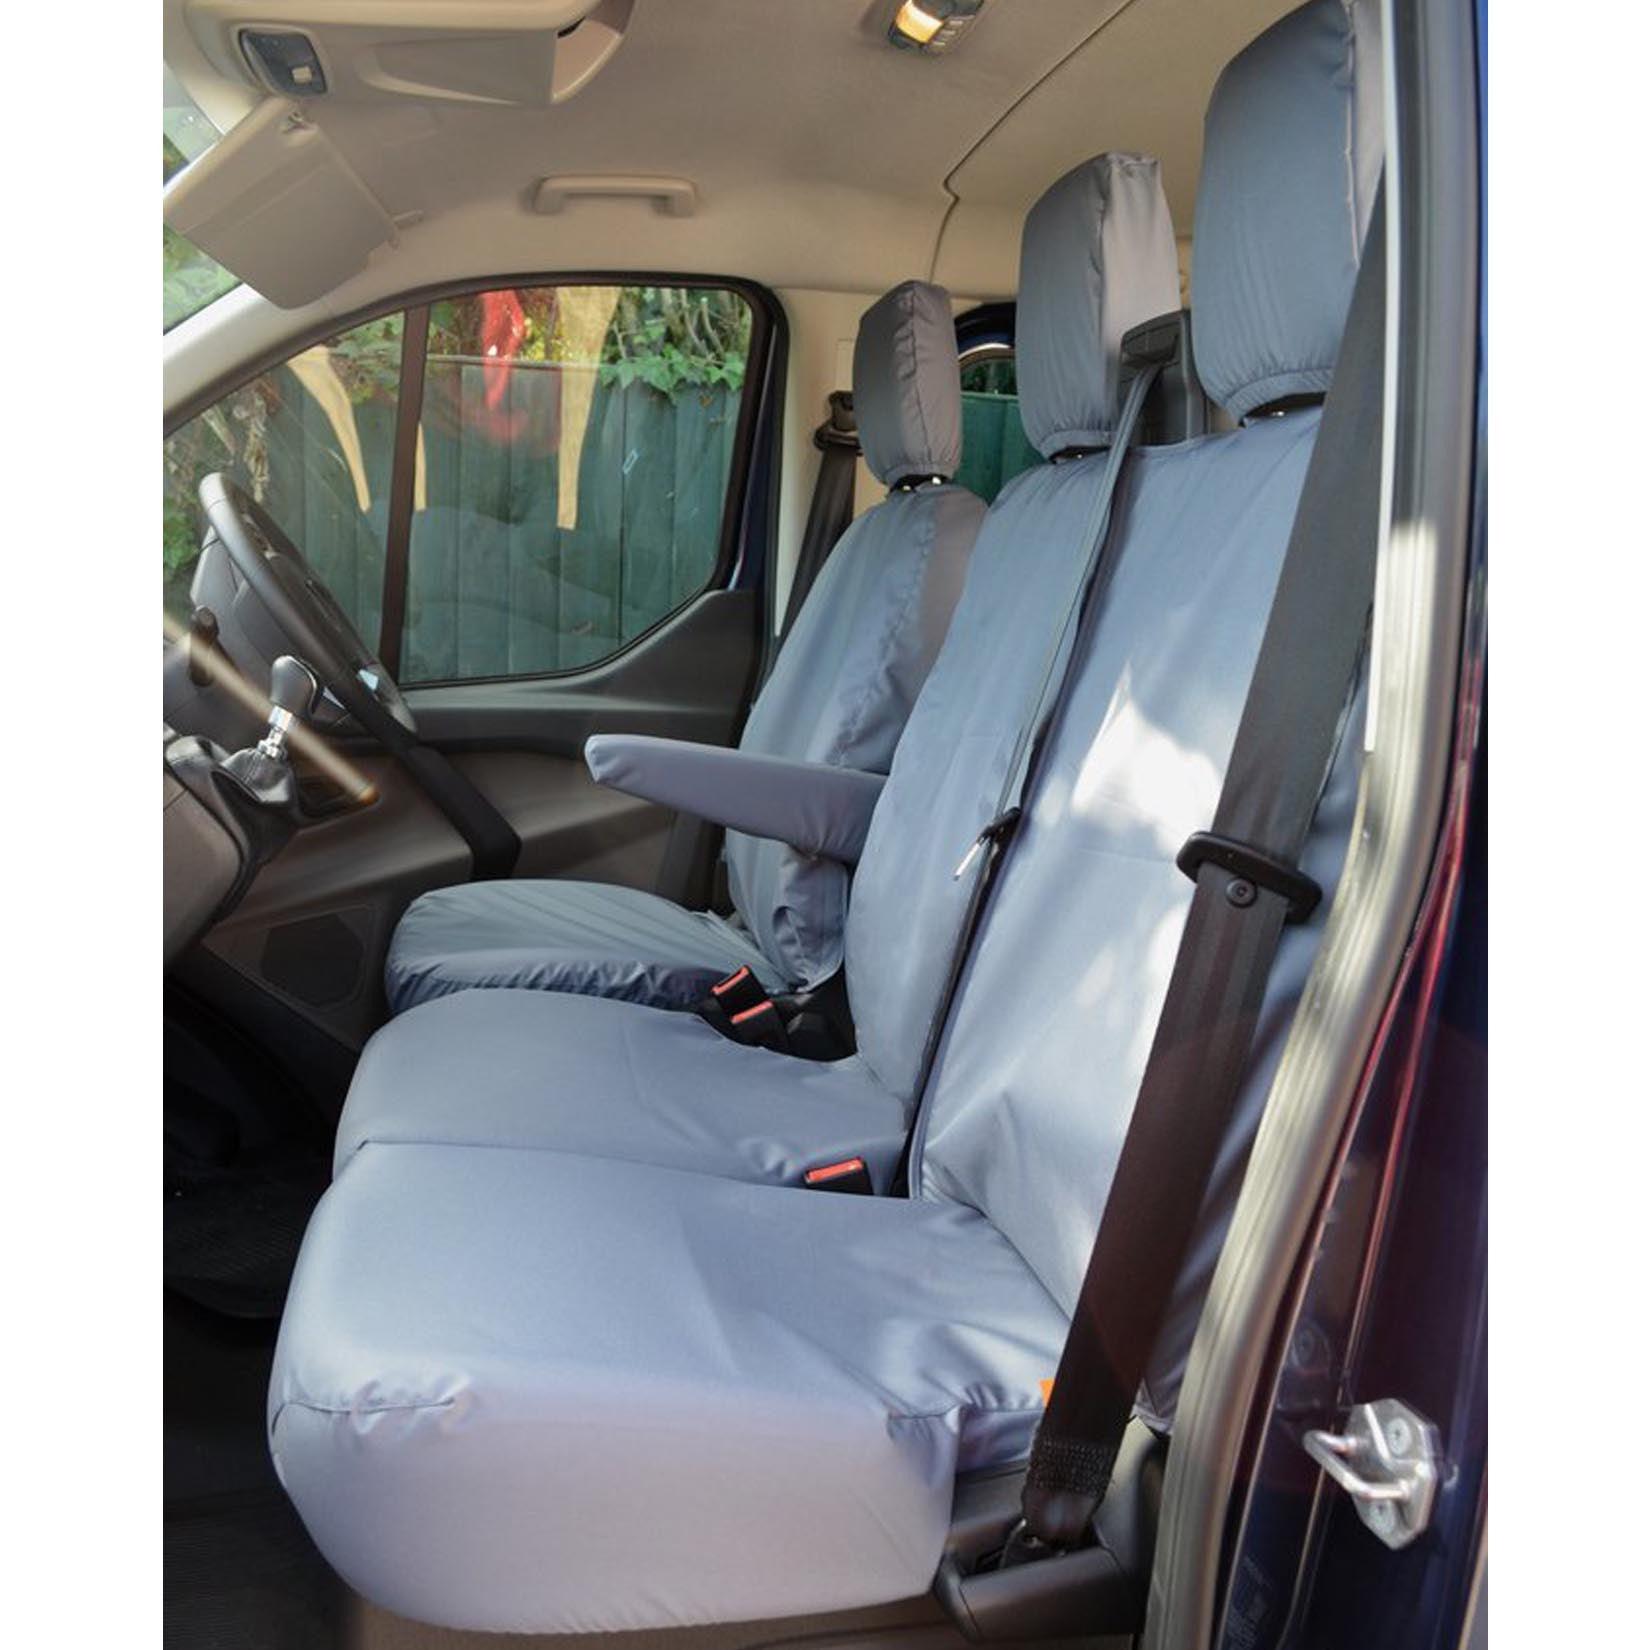 FORD TRANSIT CUSTOM 2013 ON DRIVER SEAT AND DOUBLE PASSENGER SEAT COVERS - NO WORK TRAY - GREY - Storm Xccessories2